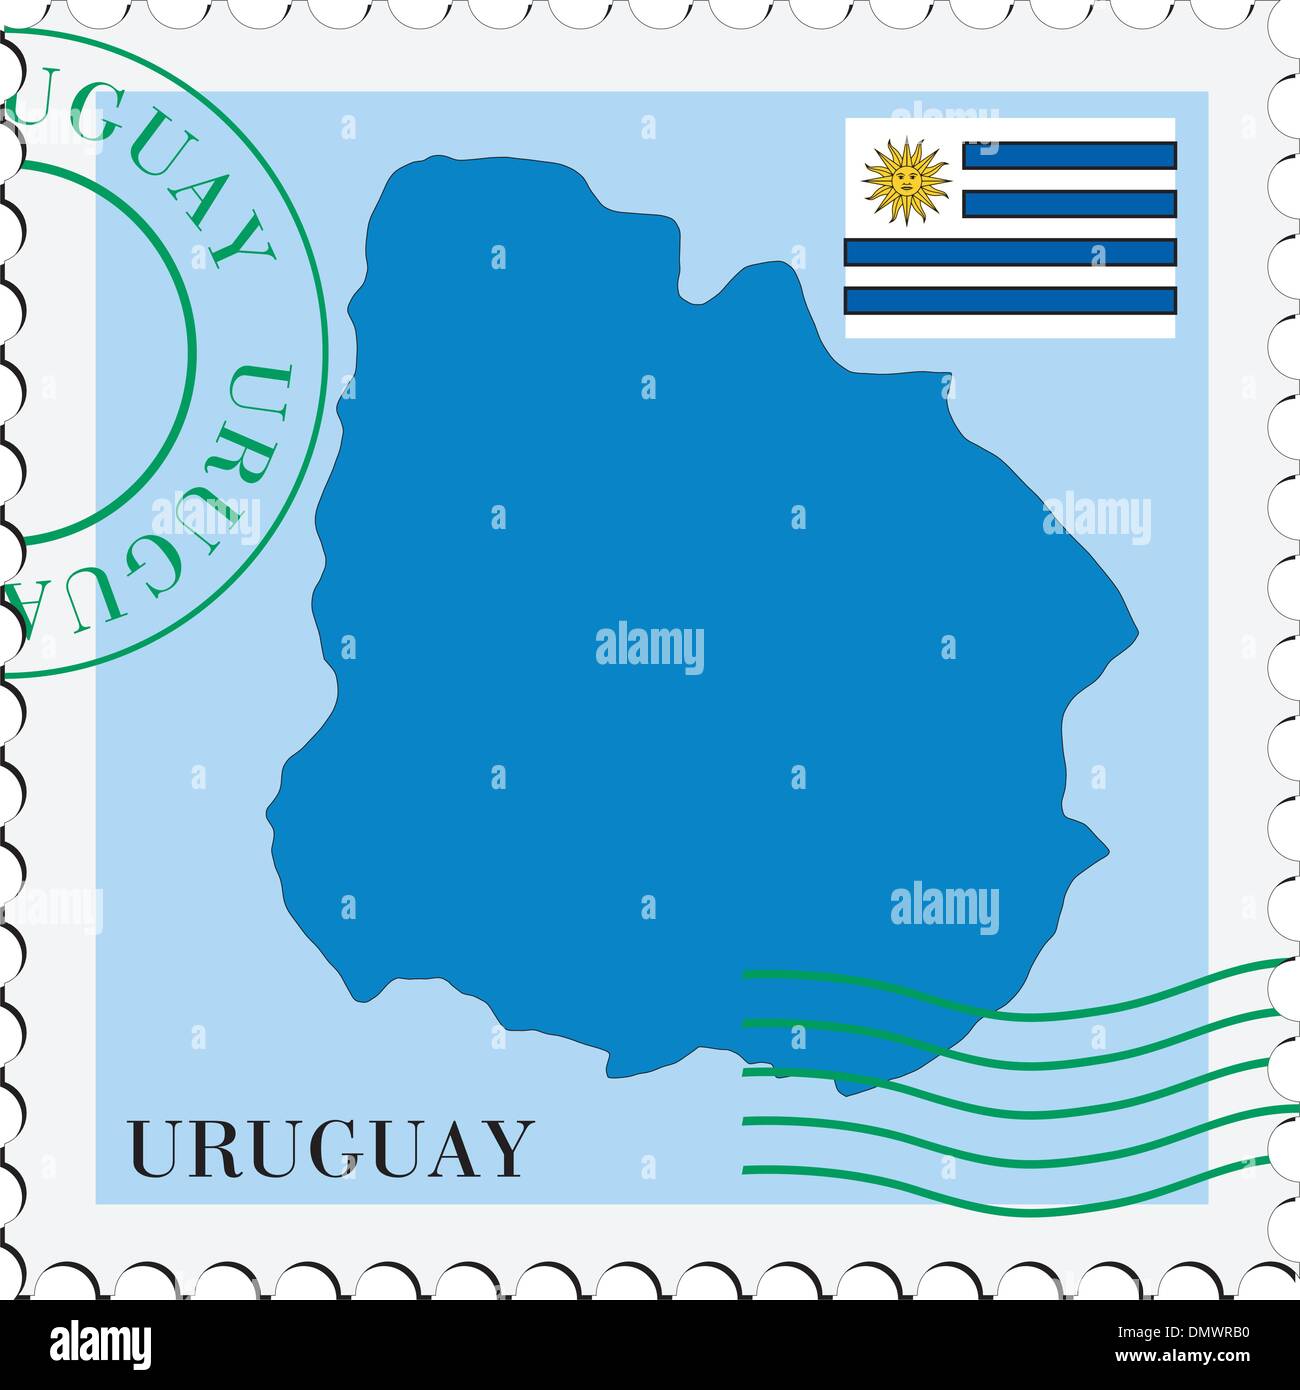 mail to/from Uruguay Stock Vector